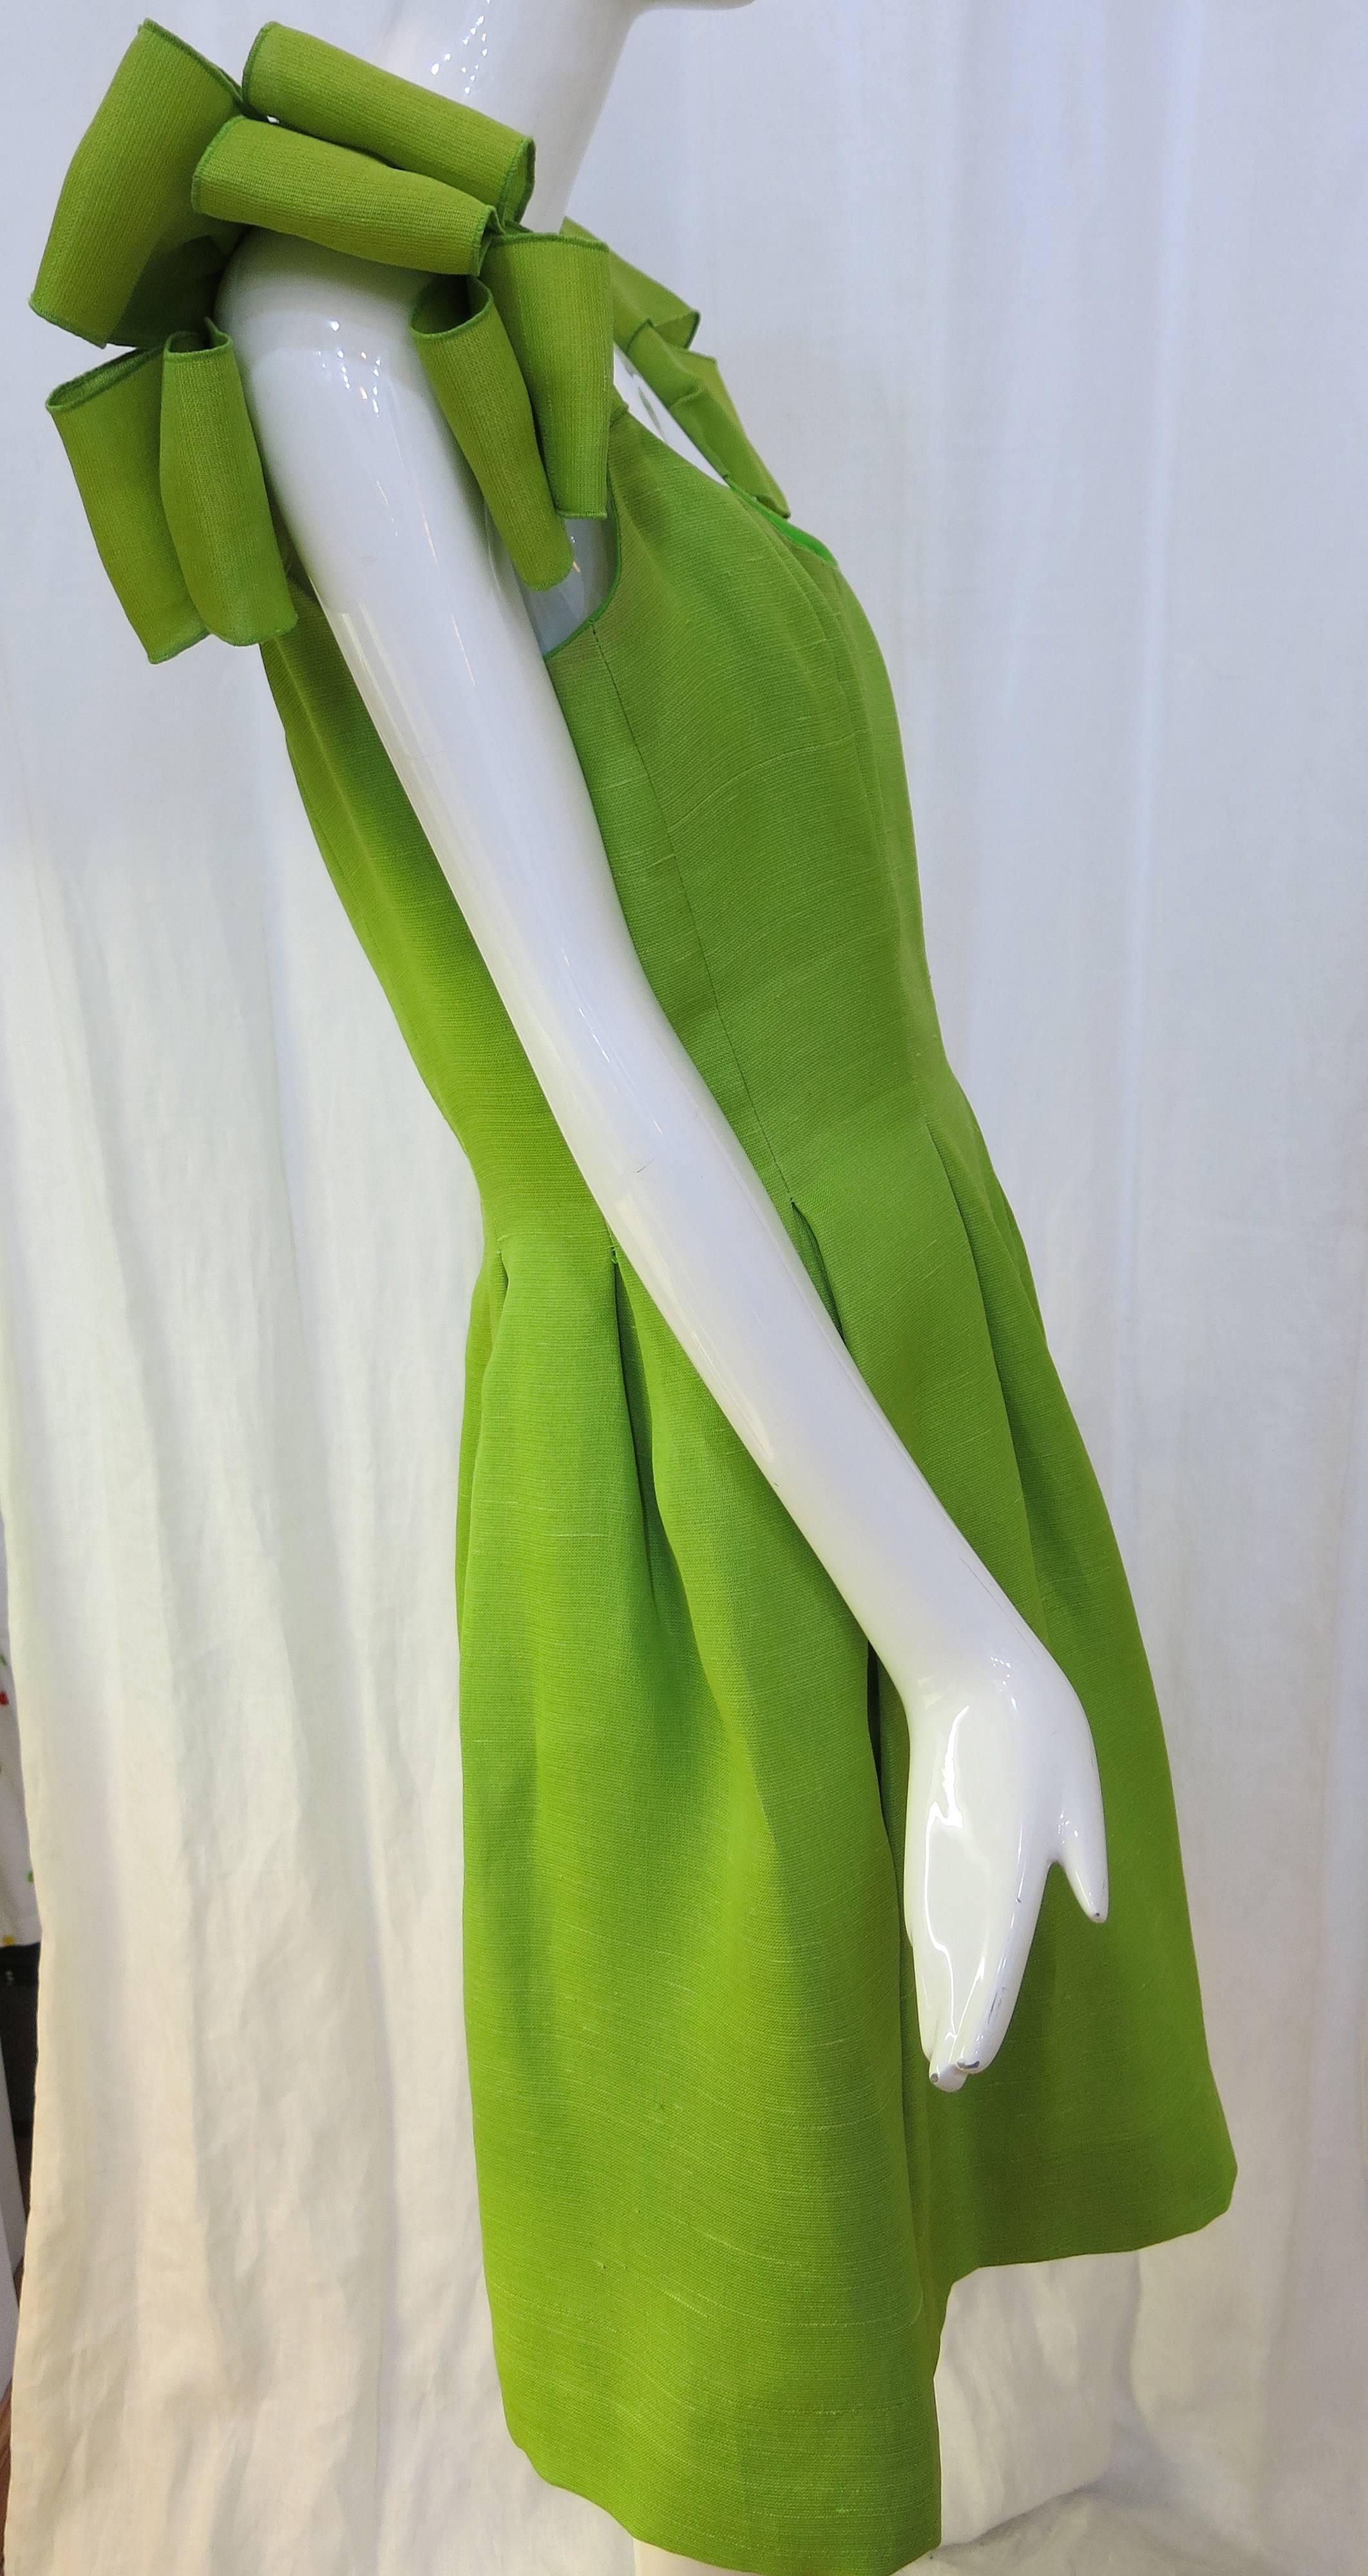 Beautiful, vibrant, lime green pleated sleeveless cocktail dress with looped shoulder detailing. Hits just below the knee in Tea Dress fashion.

Made from raw silk, this eye catching dress would be perfect for a summertime evening night on the